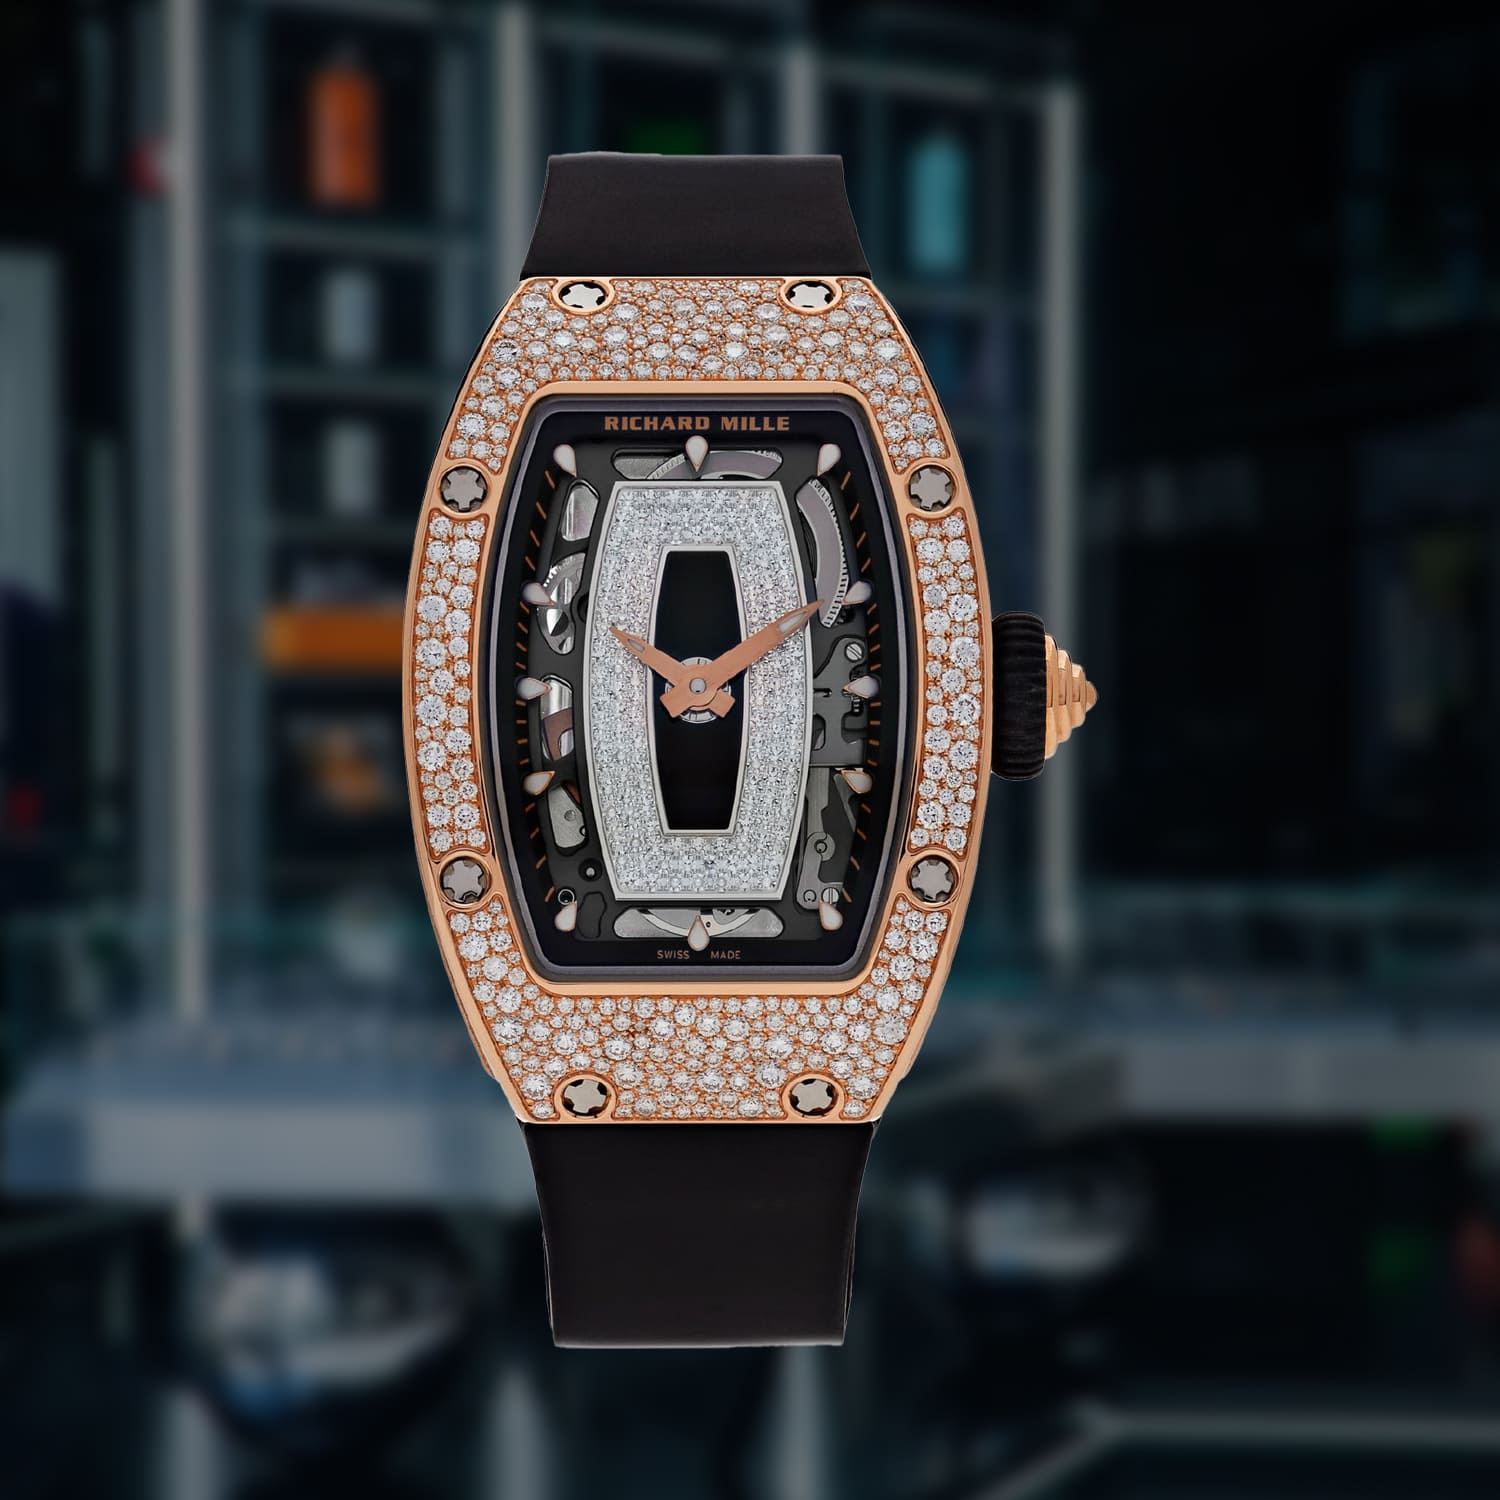 Richard Mille 07-01 | The Watch Meister